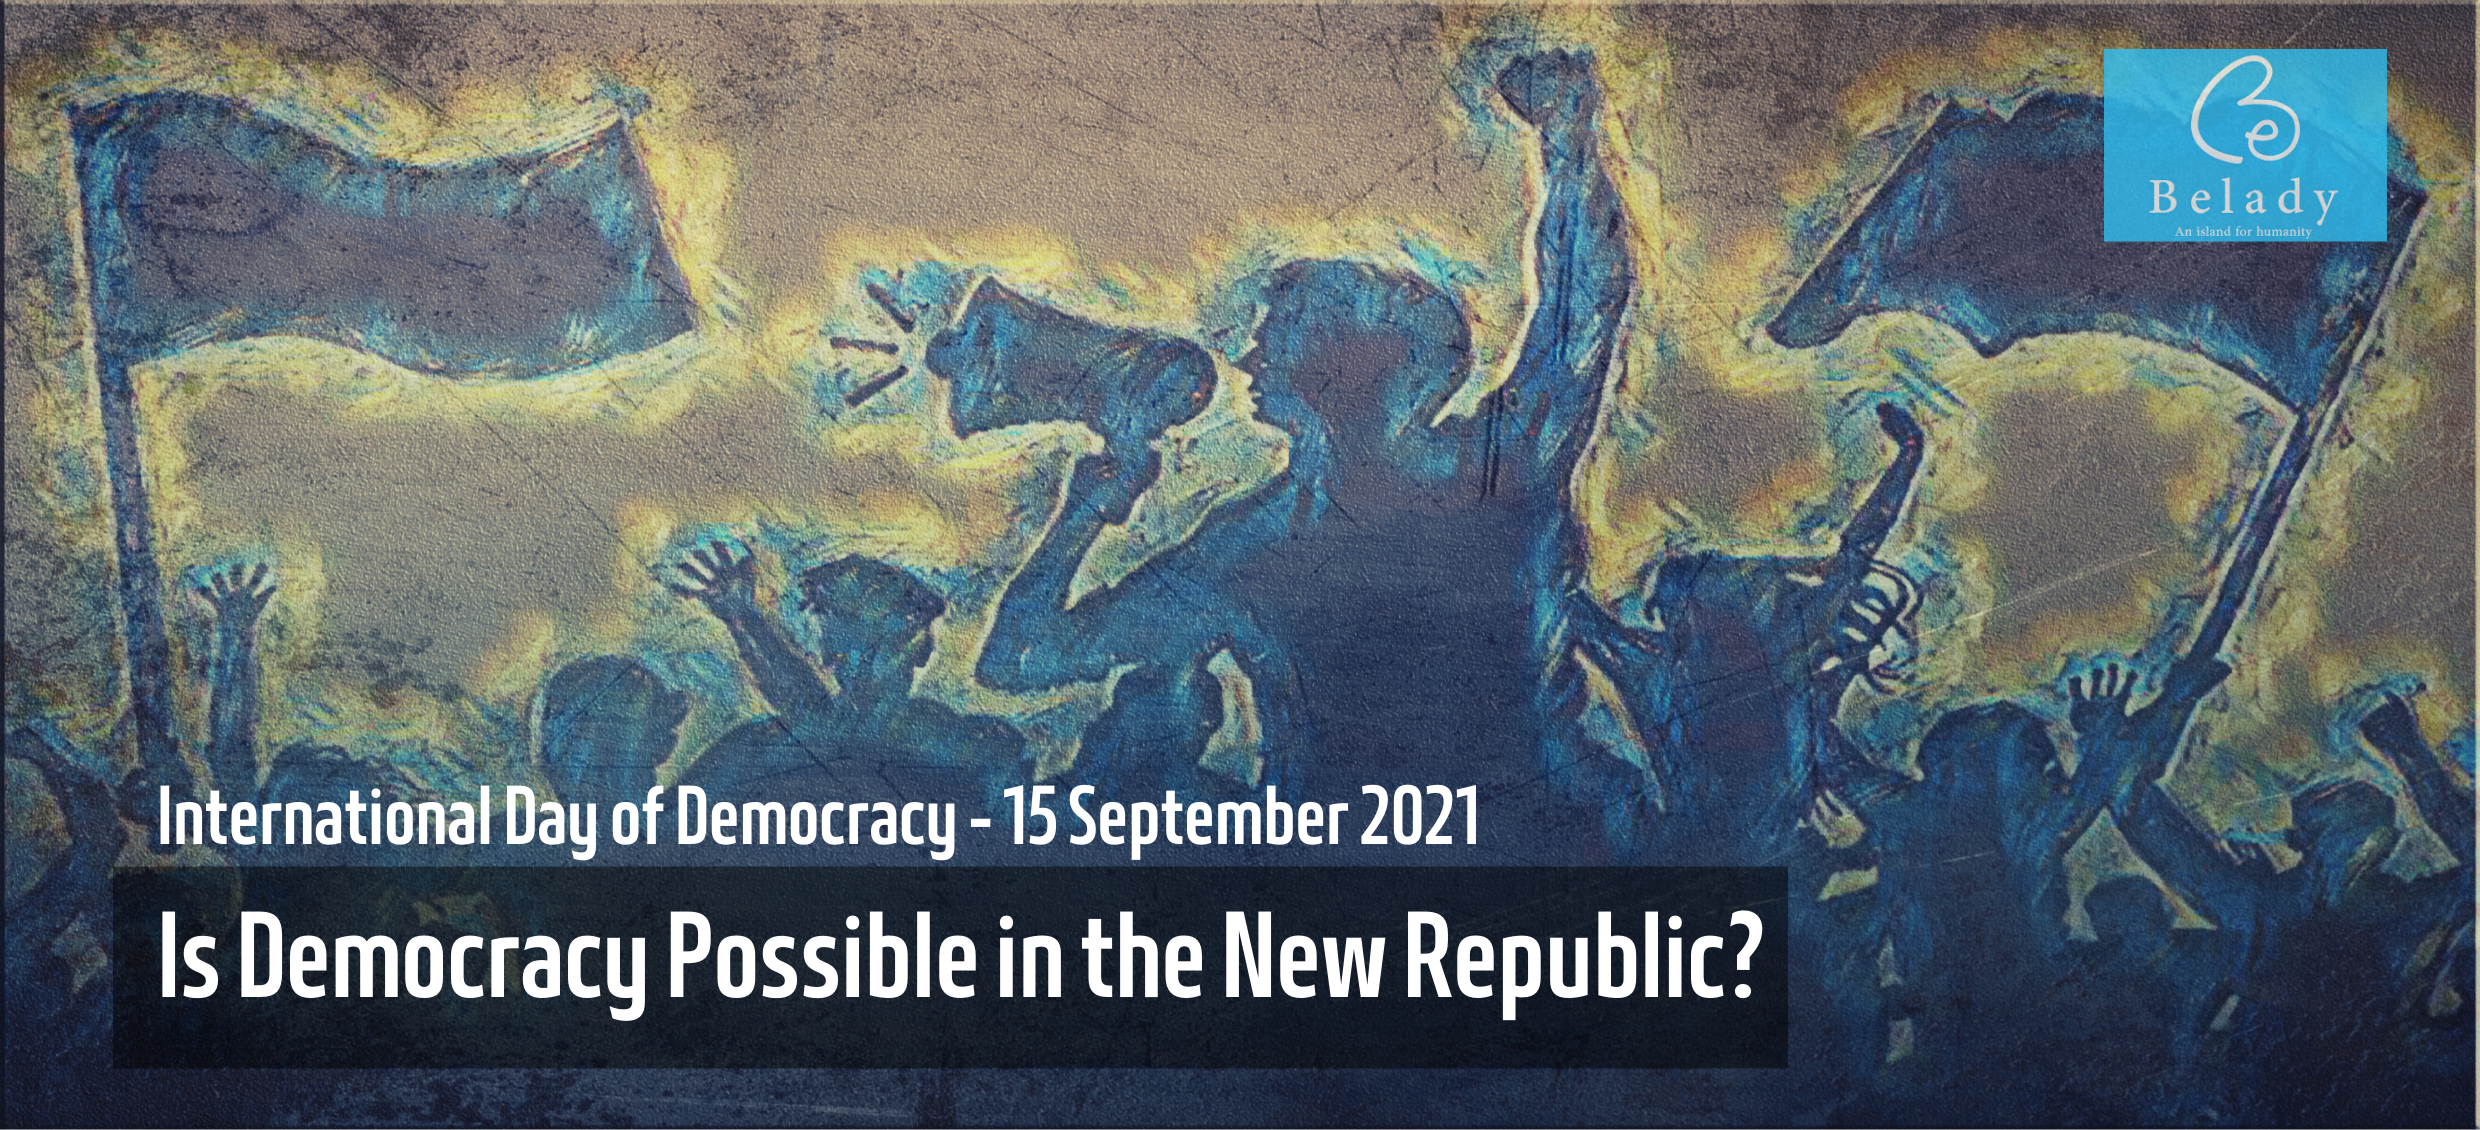 Is Democracy Possible in the New Republic?